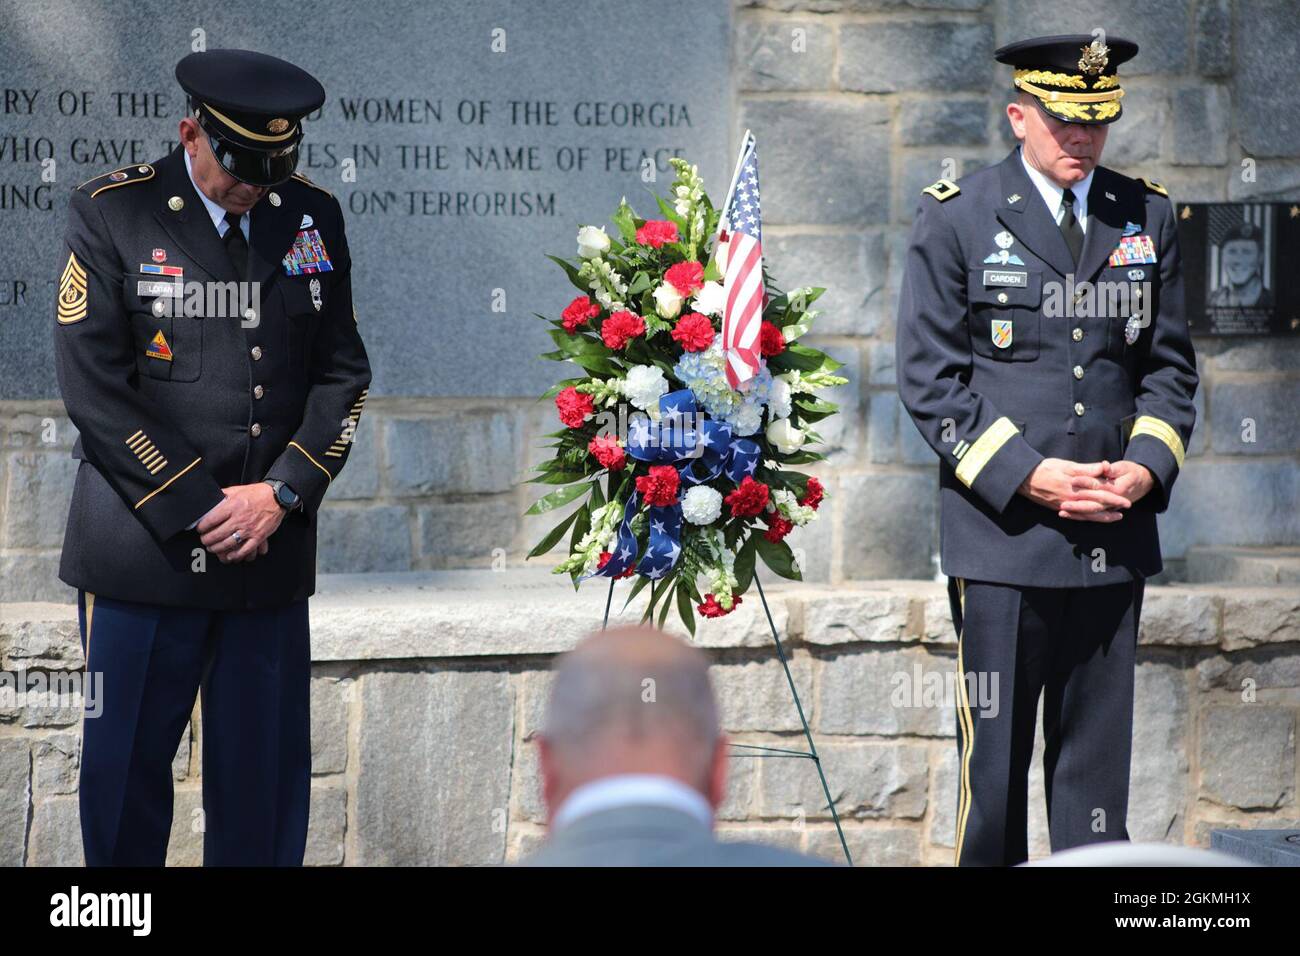 U.S. Army Maj. Gen. Thomas Carden (right), The Adjutant General of Georgia, and Command Sgt. Maj. Jeff Logan (left), the state command sergeant major of the Georgia Army National Guard, bow their heads in prayer May 27, 2021, during a Memorial Day Observation Ceremony at Clay National Guard Center in Marietta, Georgia. The Georgia National Guard memorial wall is dedicated to the memory of 43 Georgia Army National Guard Soldiers who have fallen since September 11, 2001. Stock Photo